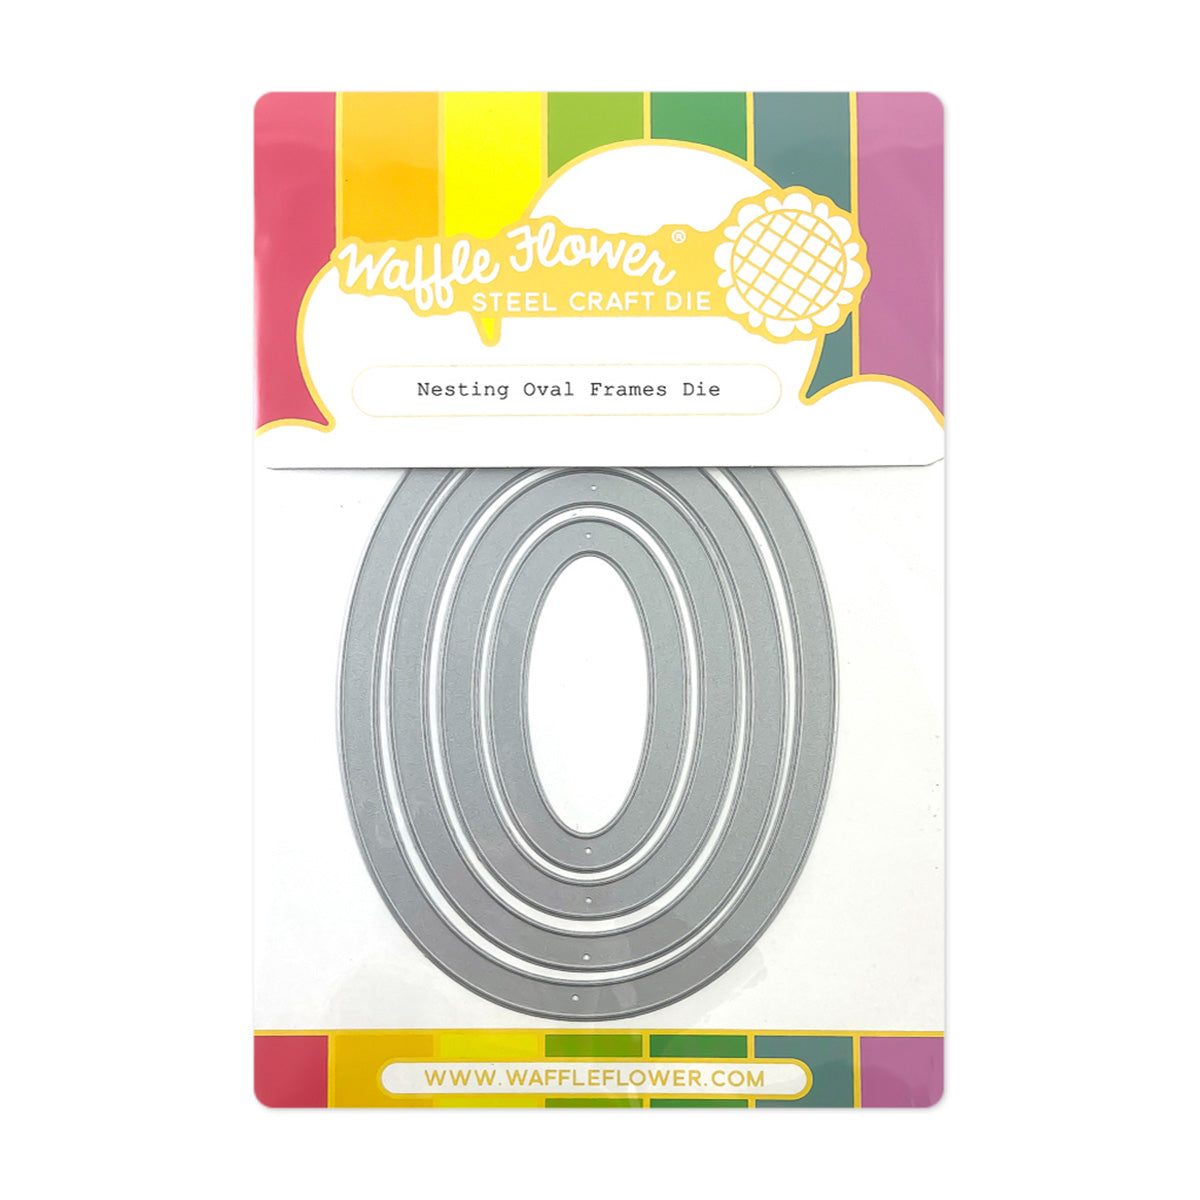 Nesting Oval Die Border Metal Die Cuts for Card Making,9Pc Oval Frame  Cutting Di